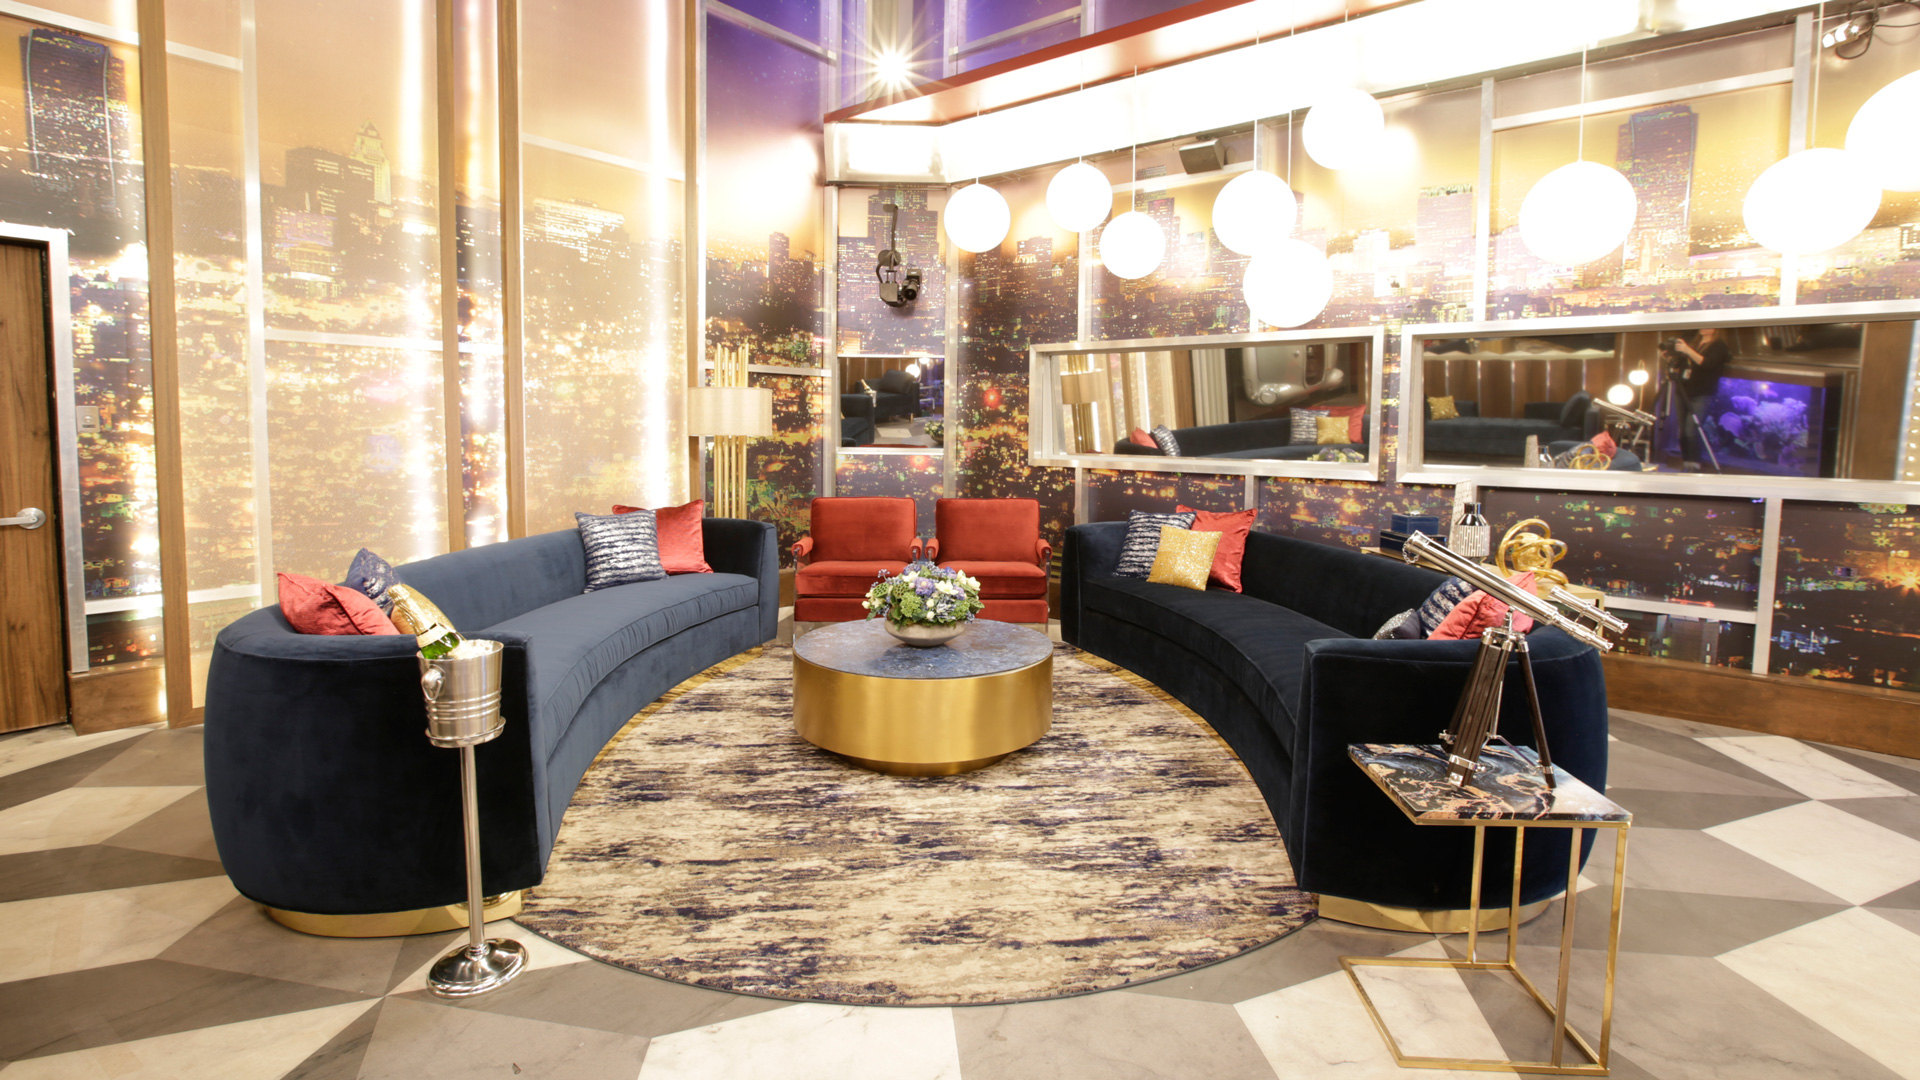 Check Out The Celebrity Big Brother House!